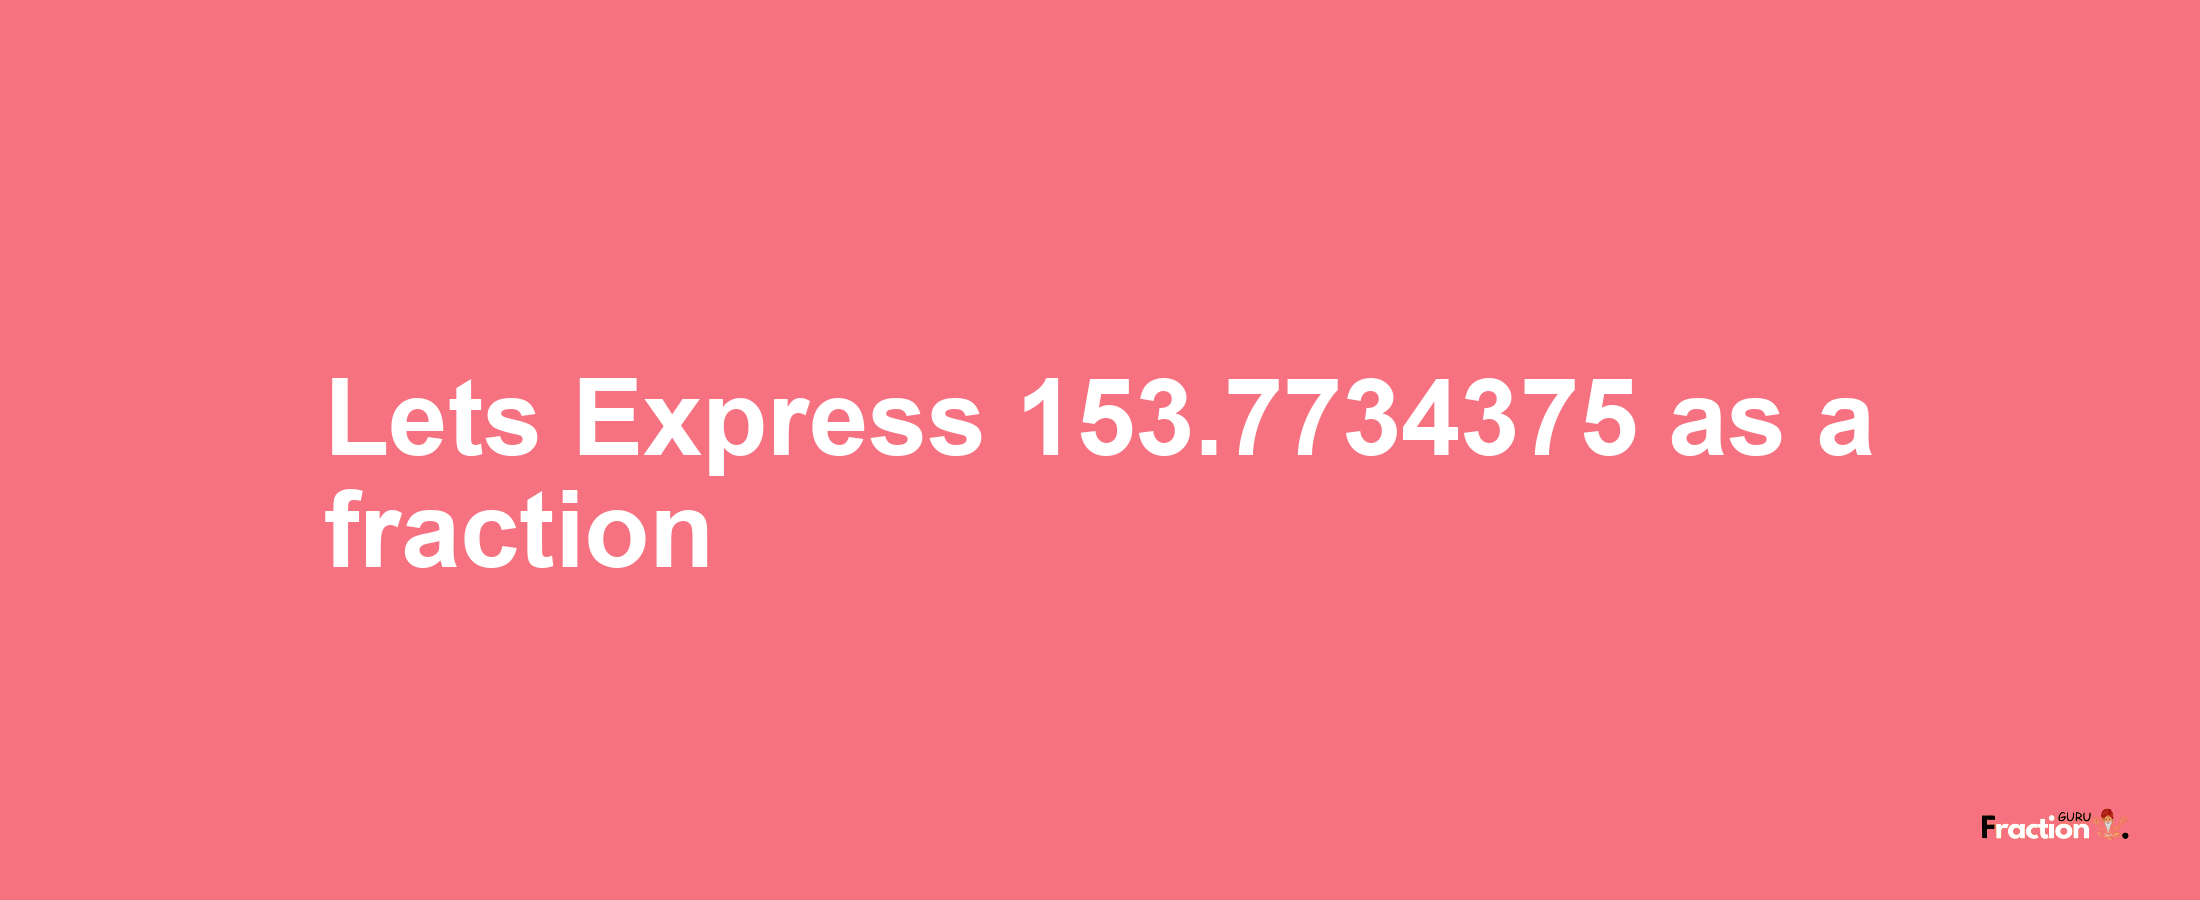 Lets Express 153.7734375 as afraction